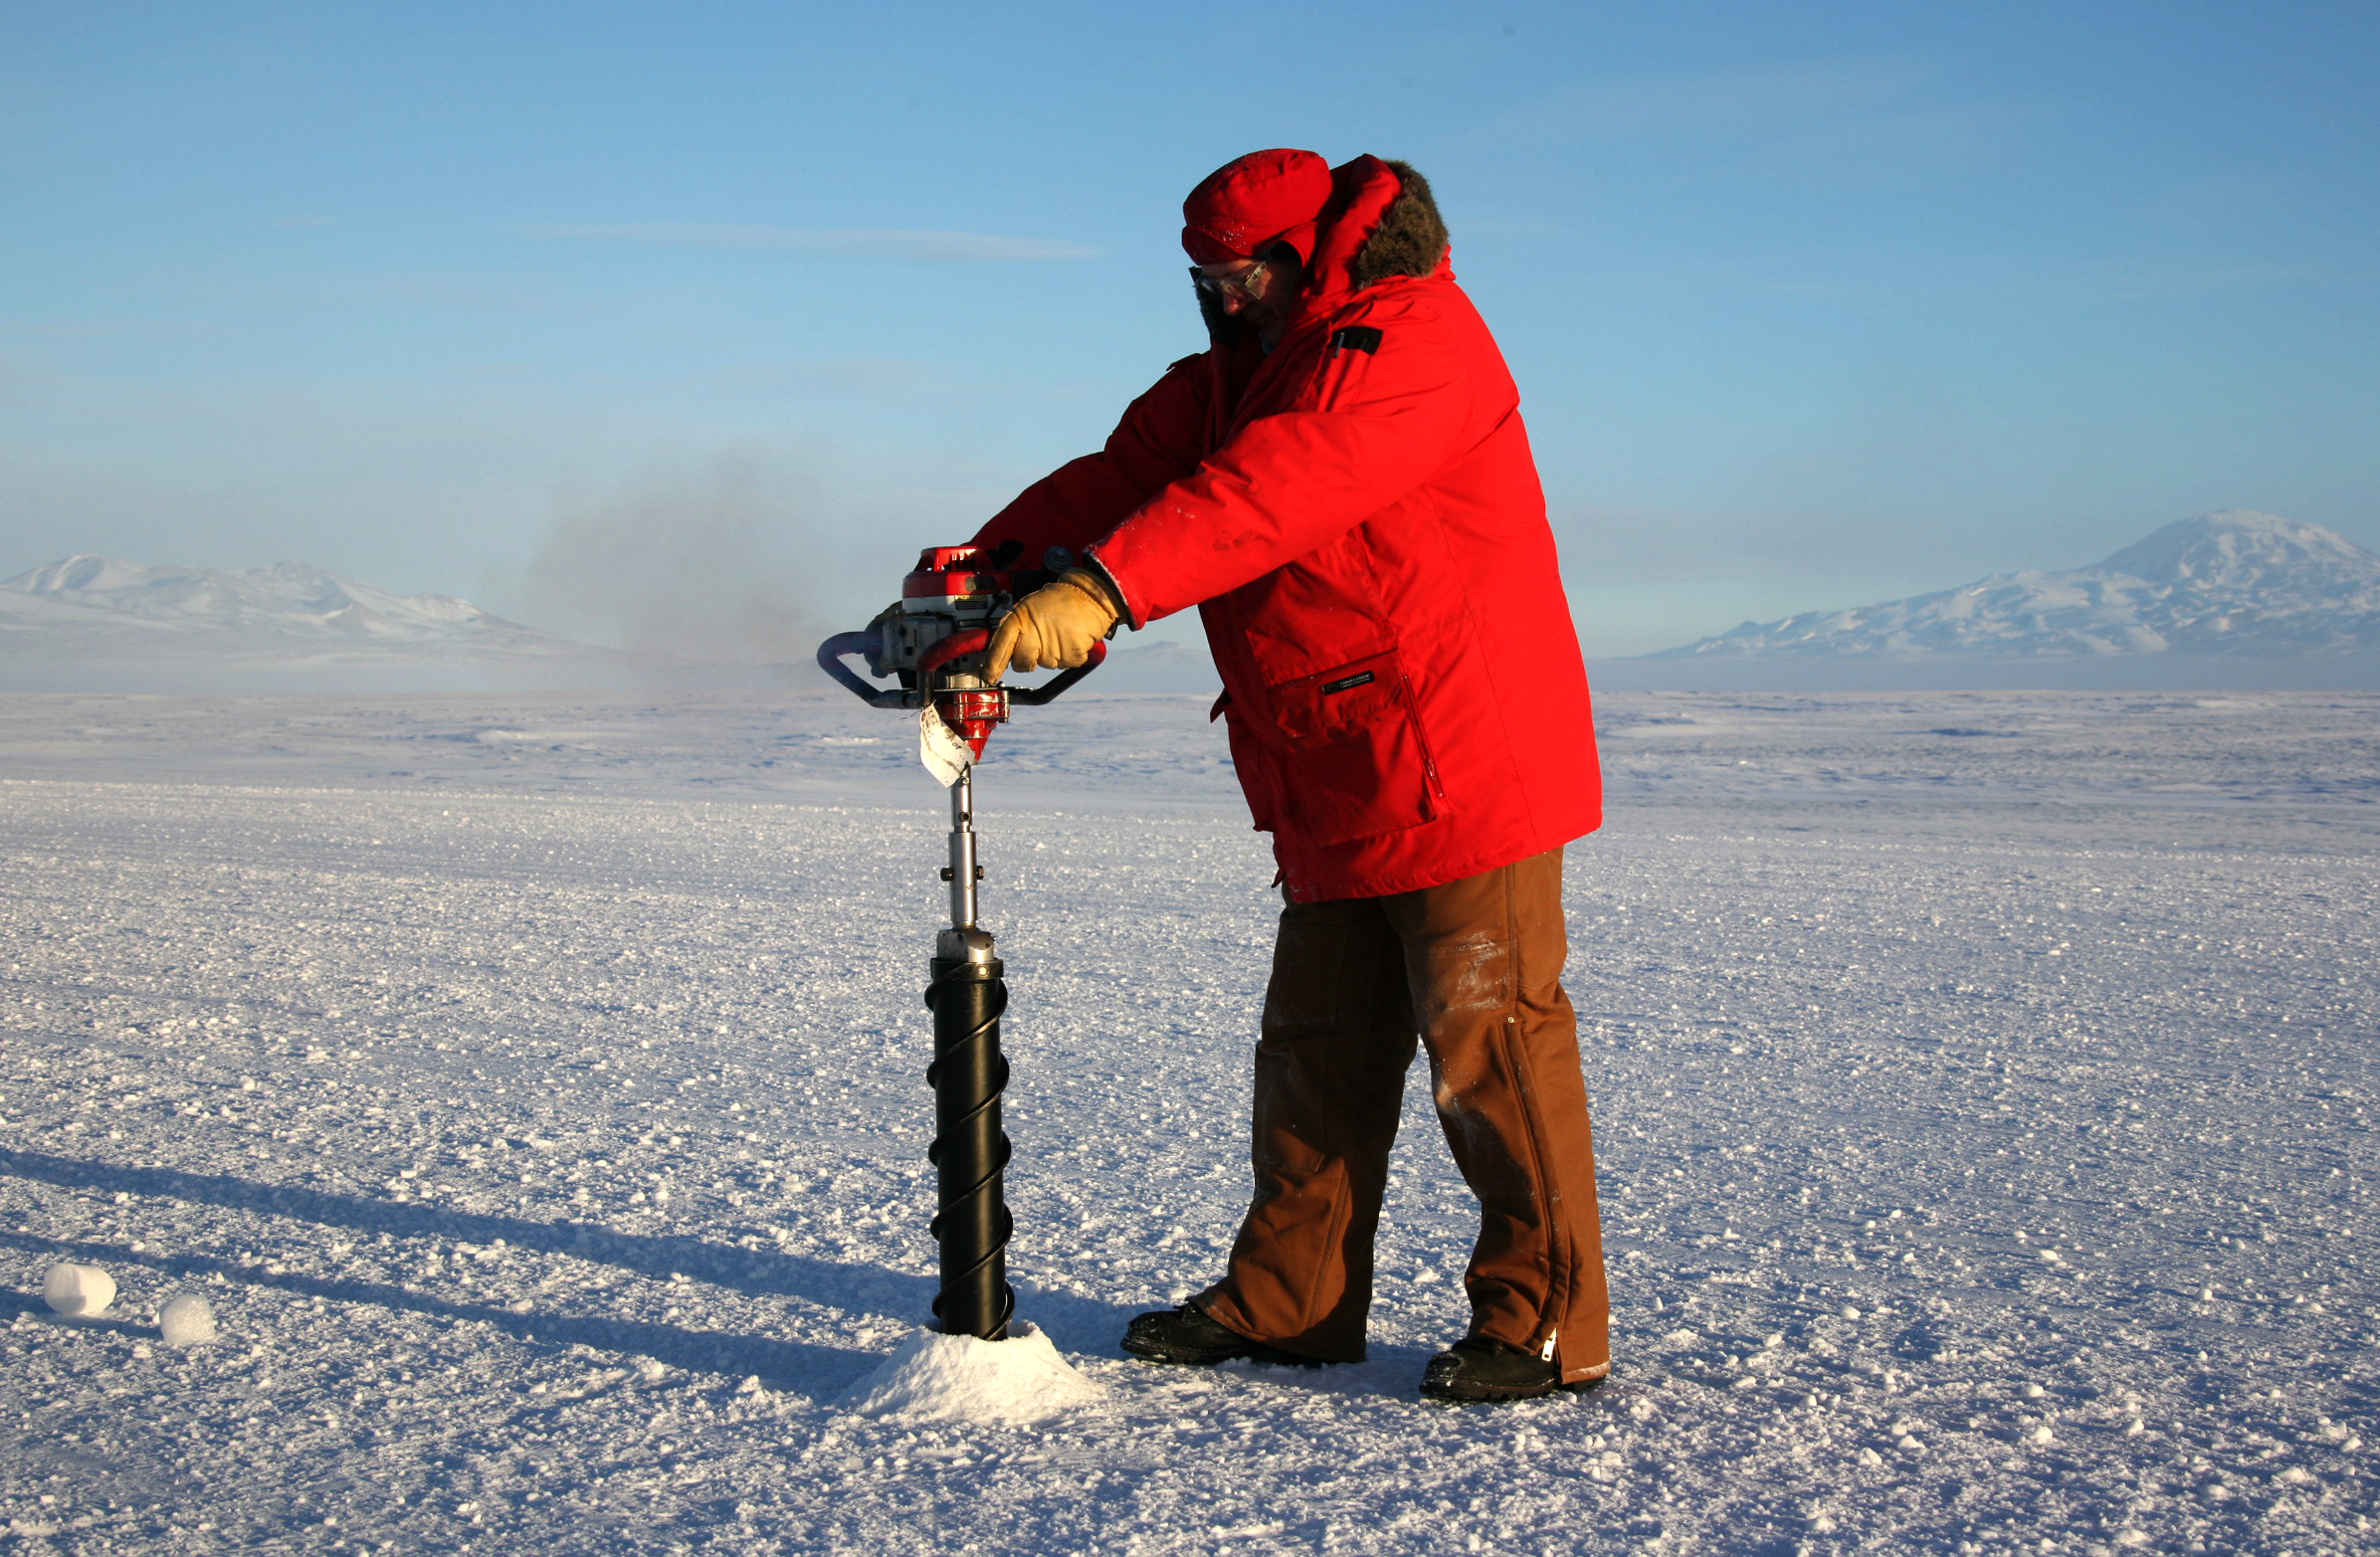 Man in red coat drilling into ice.